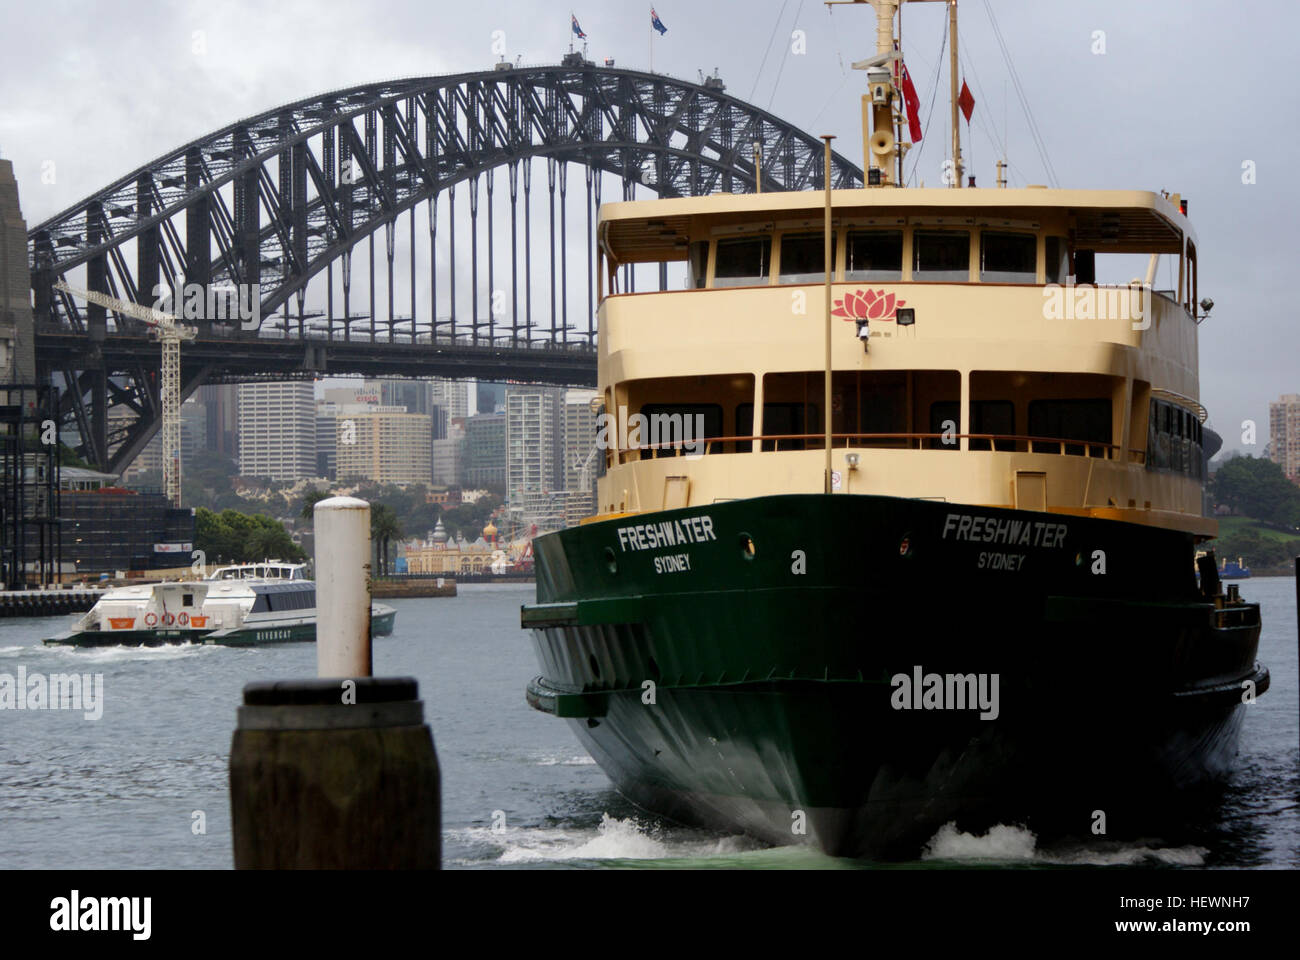 More than 14 million people cross-cross Sydney Harbour by ferry every year, chugging out from the main hub of Circular Quay to head west up the Parramatta River, north on the legendary voyage to Manly or east to Watsons Bay. Stock Photo